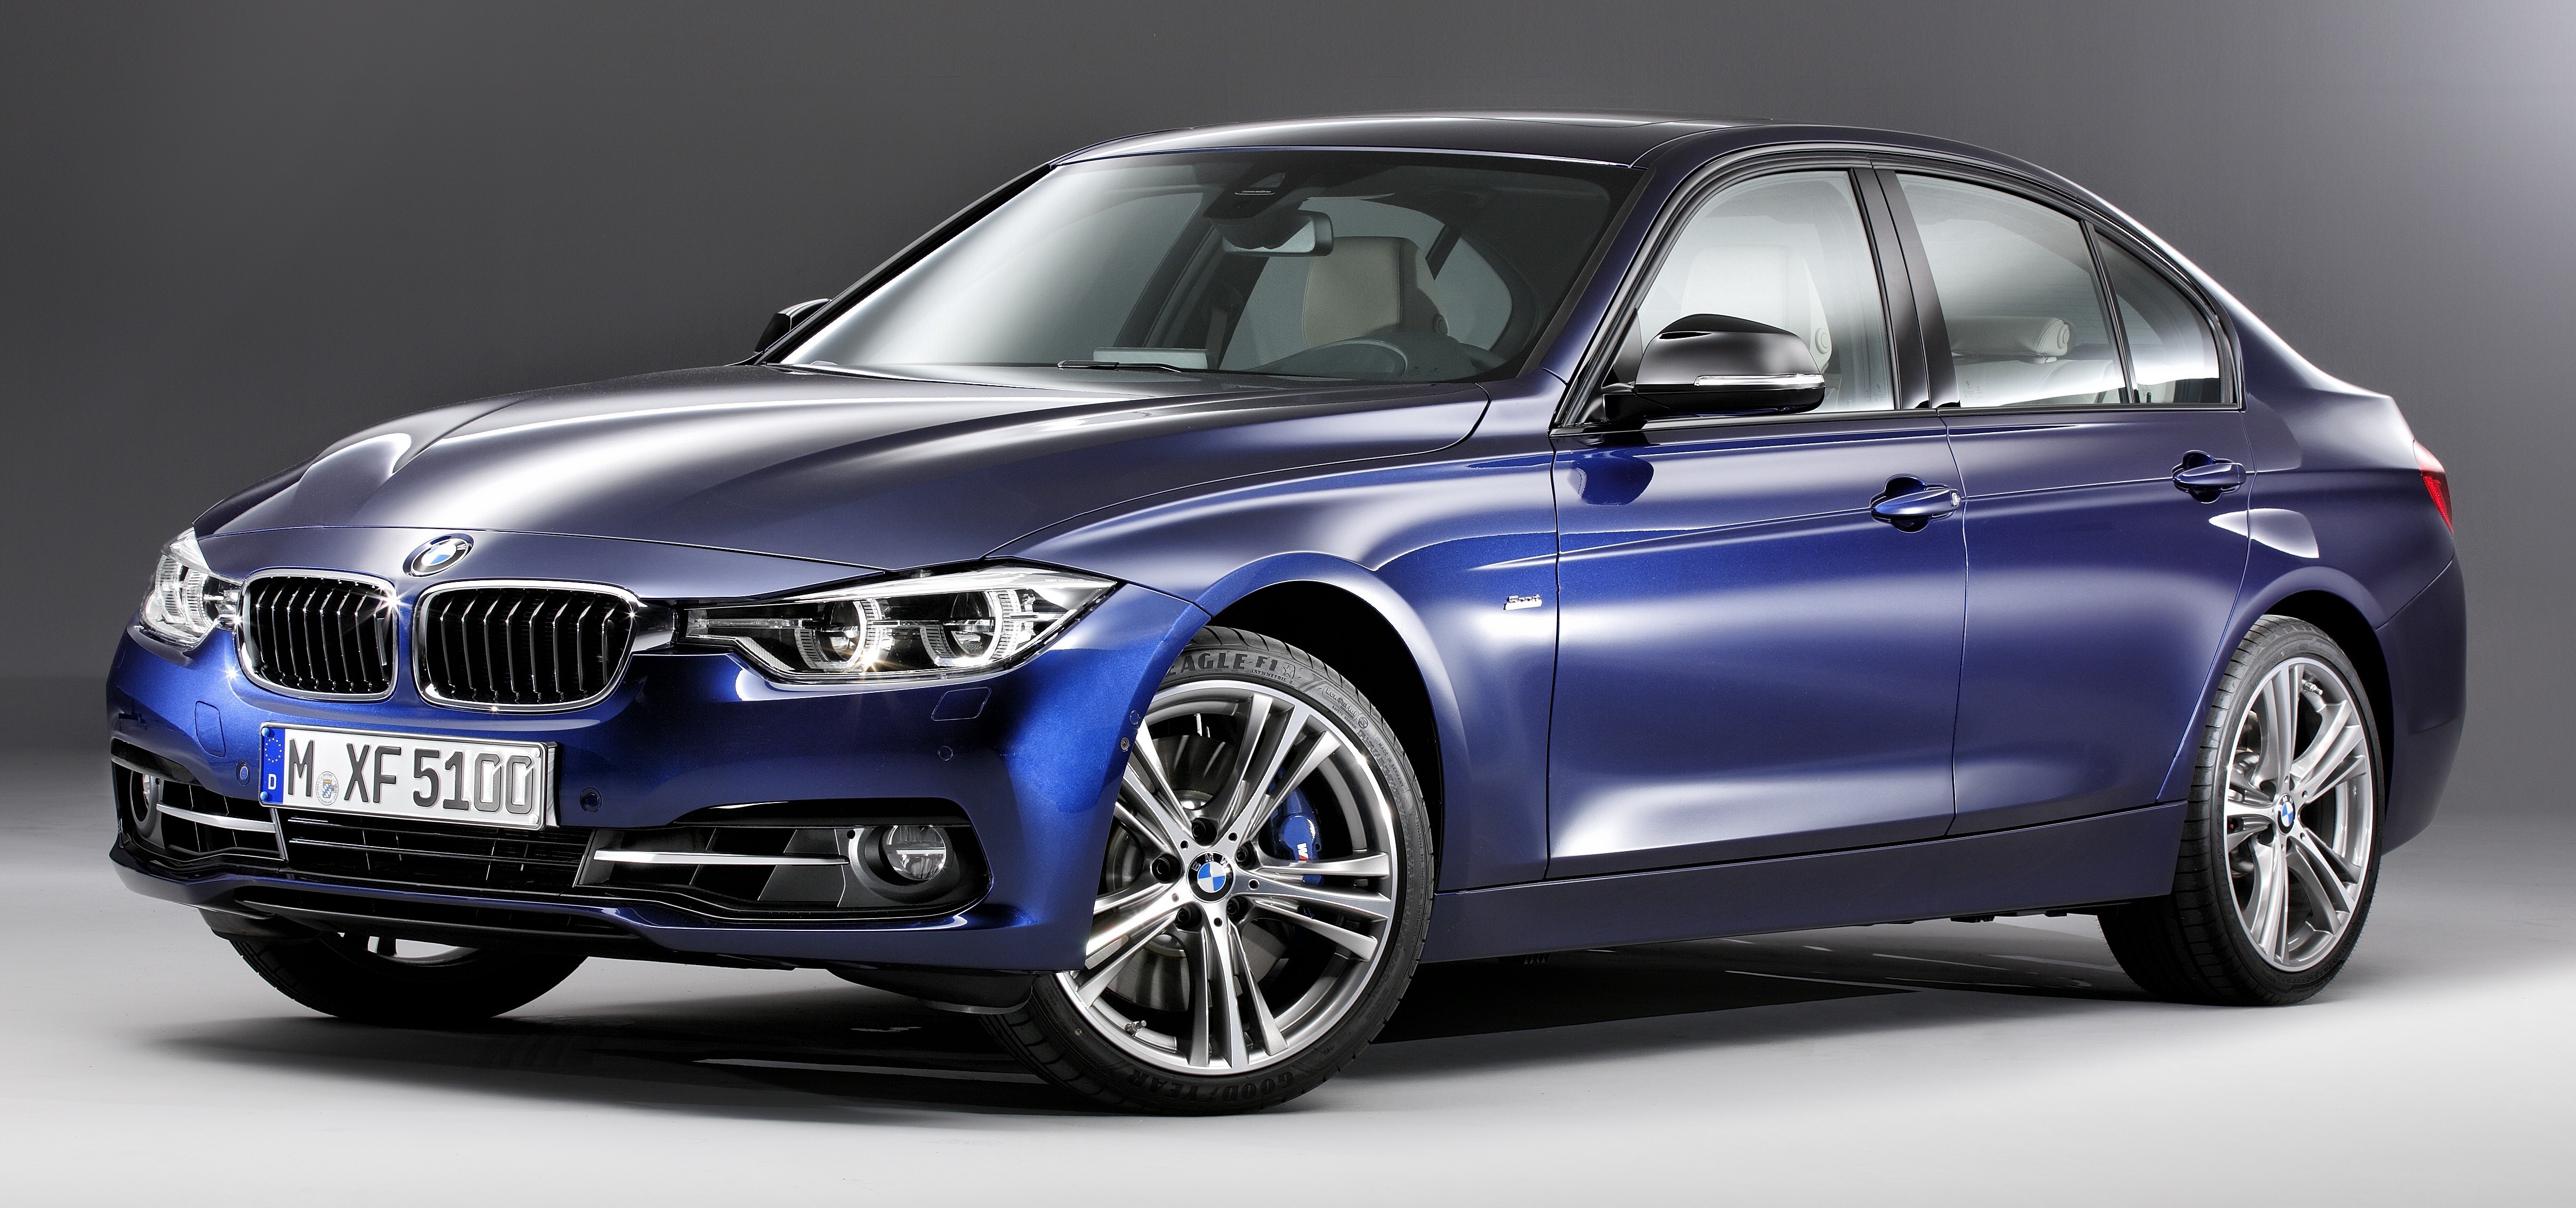 F30 BMW 3 Series LCI unveiled updated looks, new engine